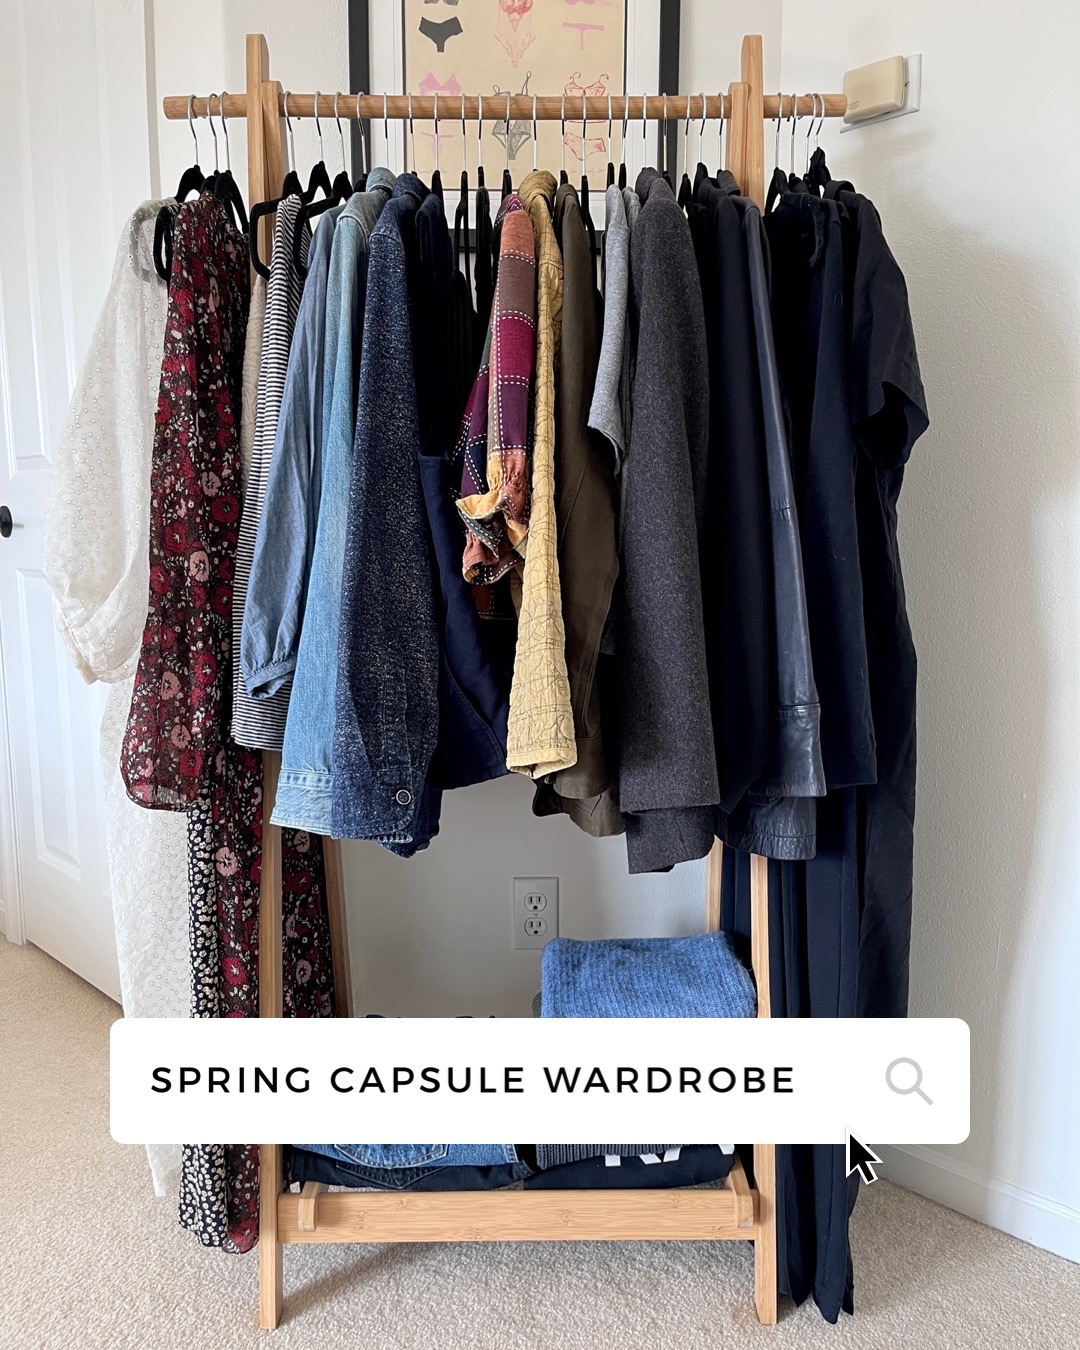 Spring Capsule Wardrobe Part 2: What's in it? - Uncomplicated Spaces